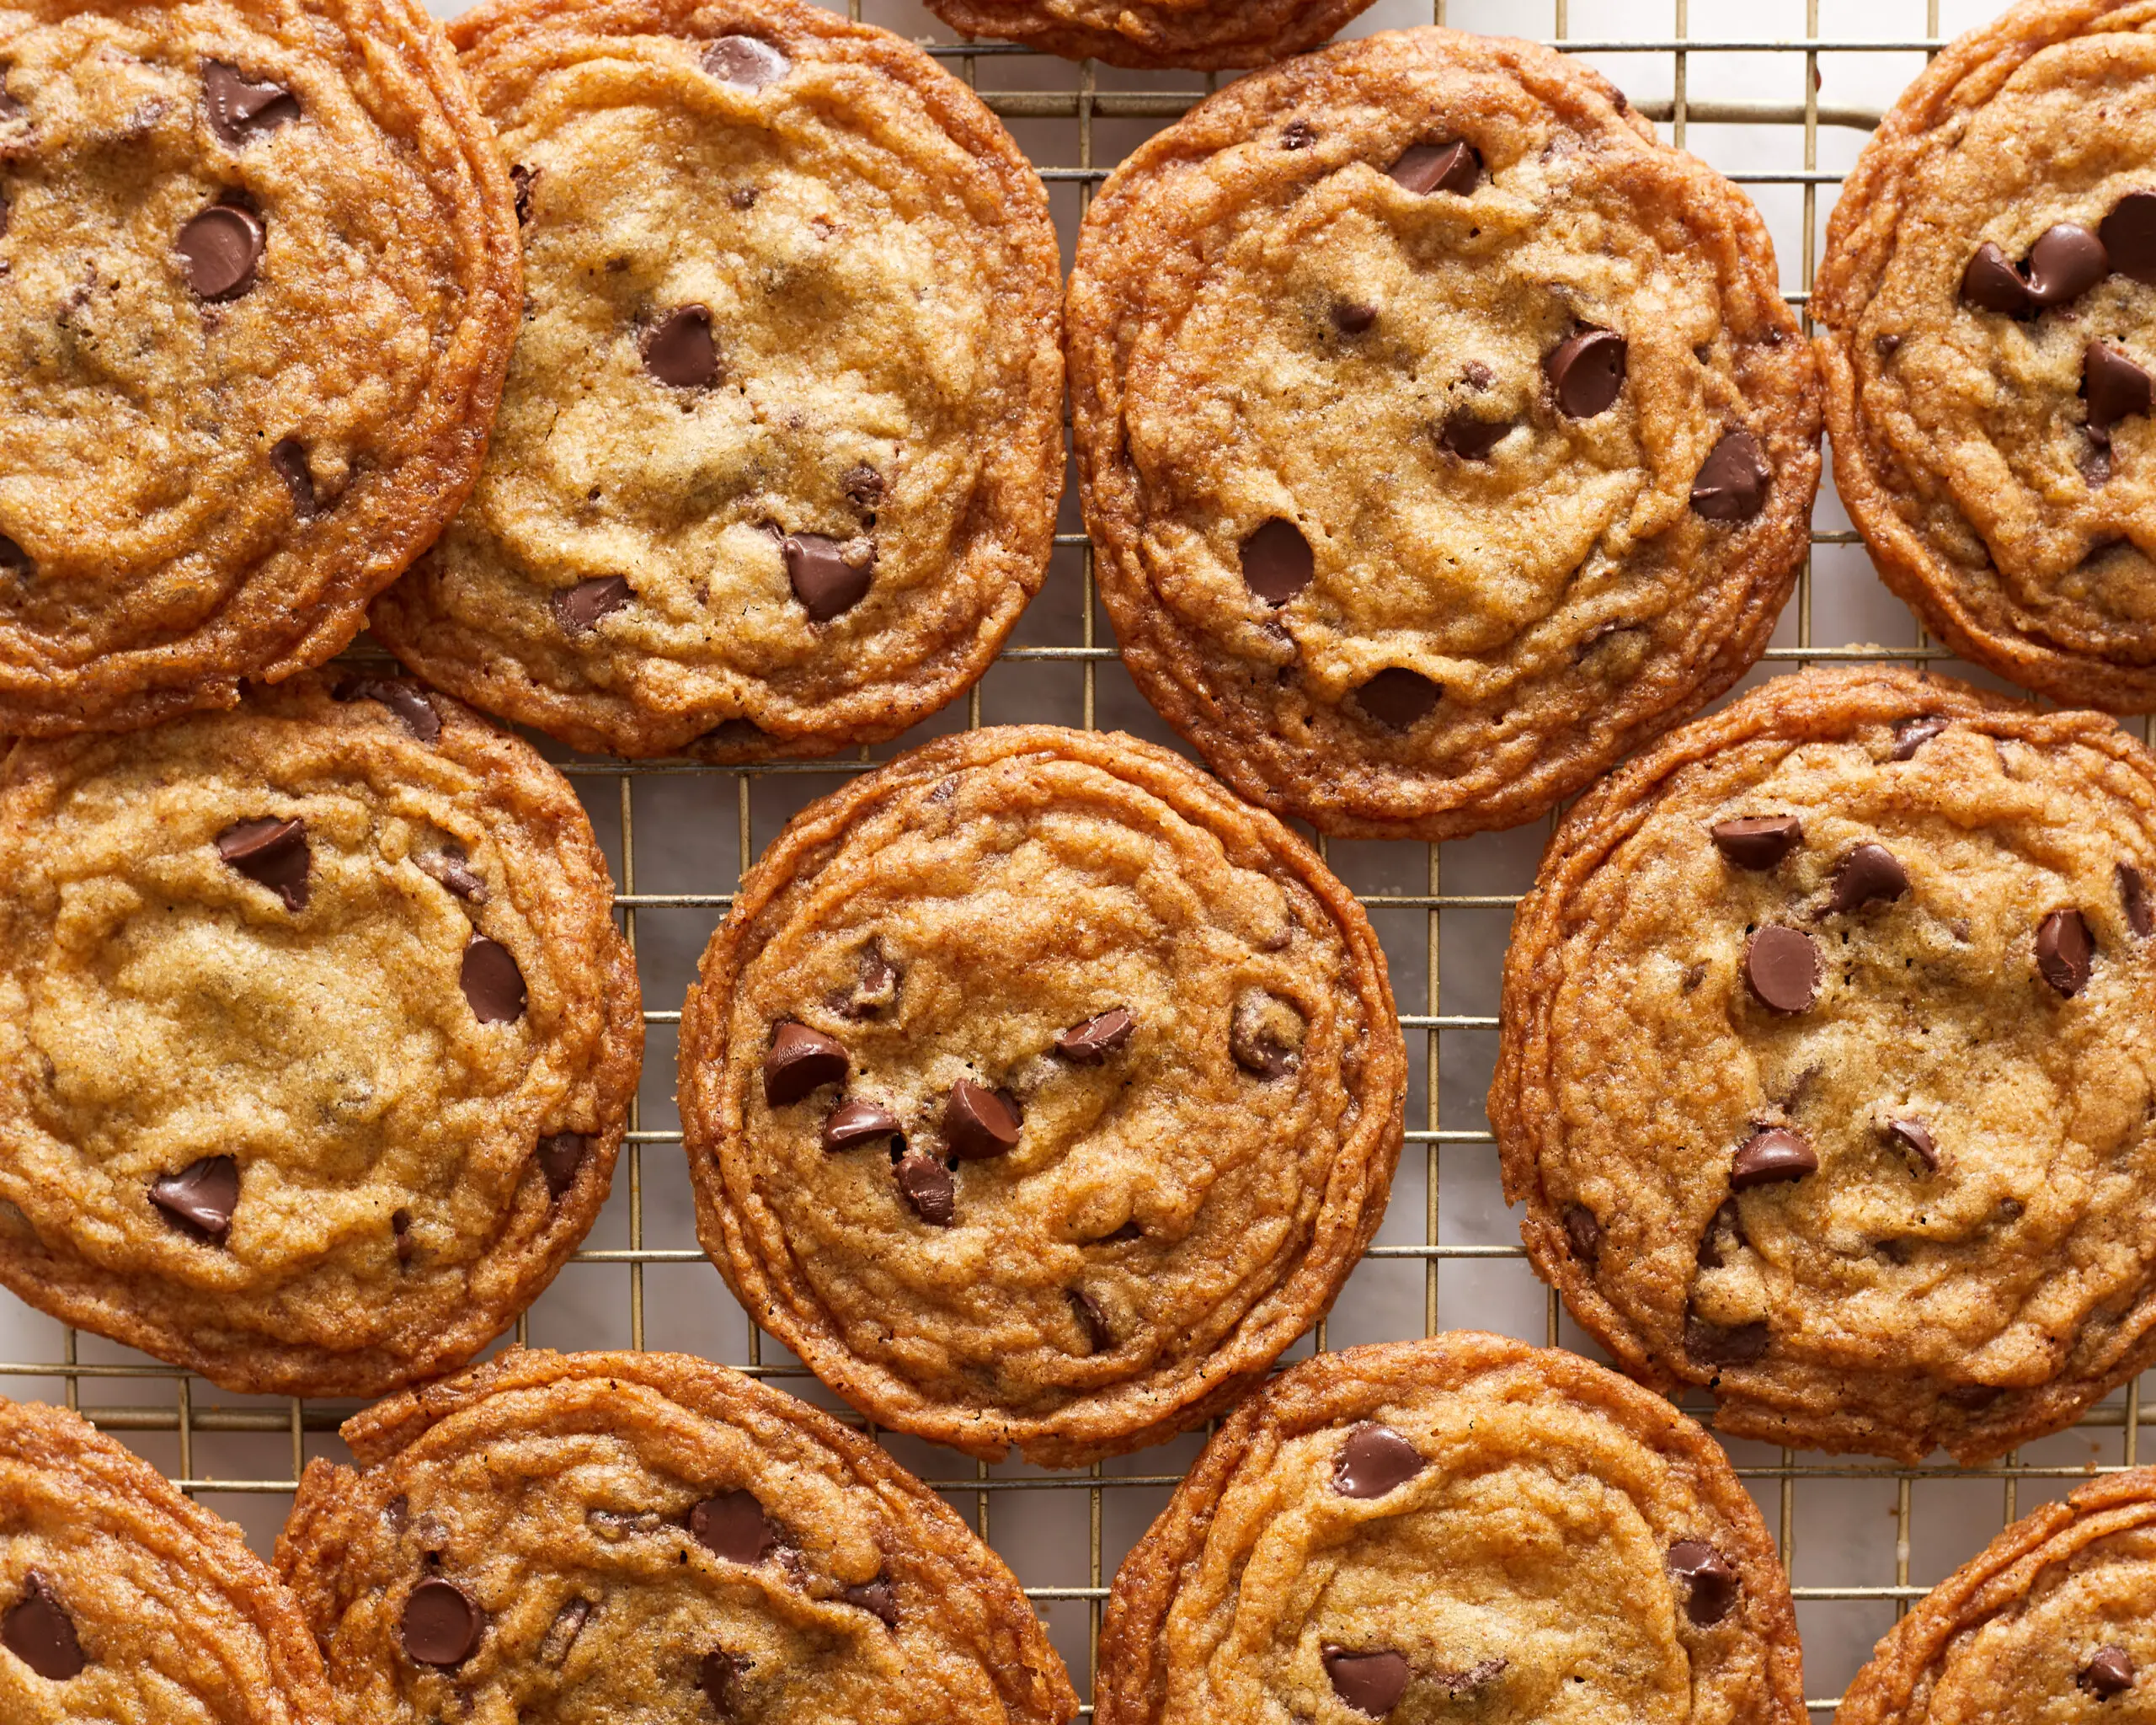 several crispy brown butter chocolate chip cookies side by side on a cooling rack